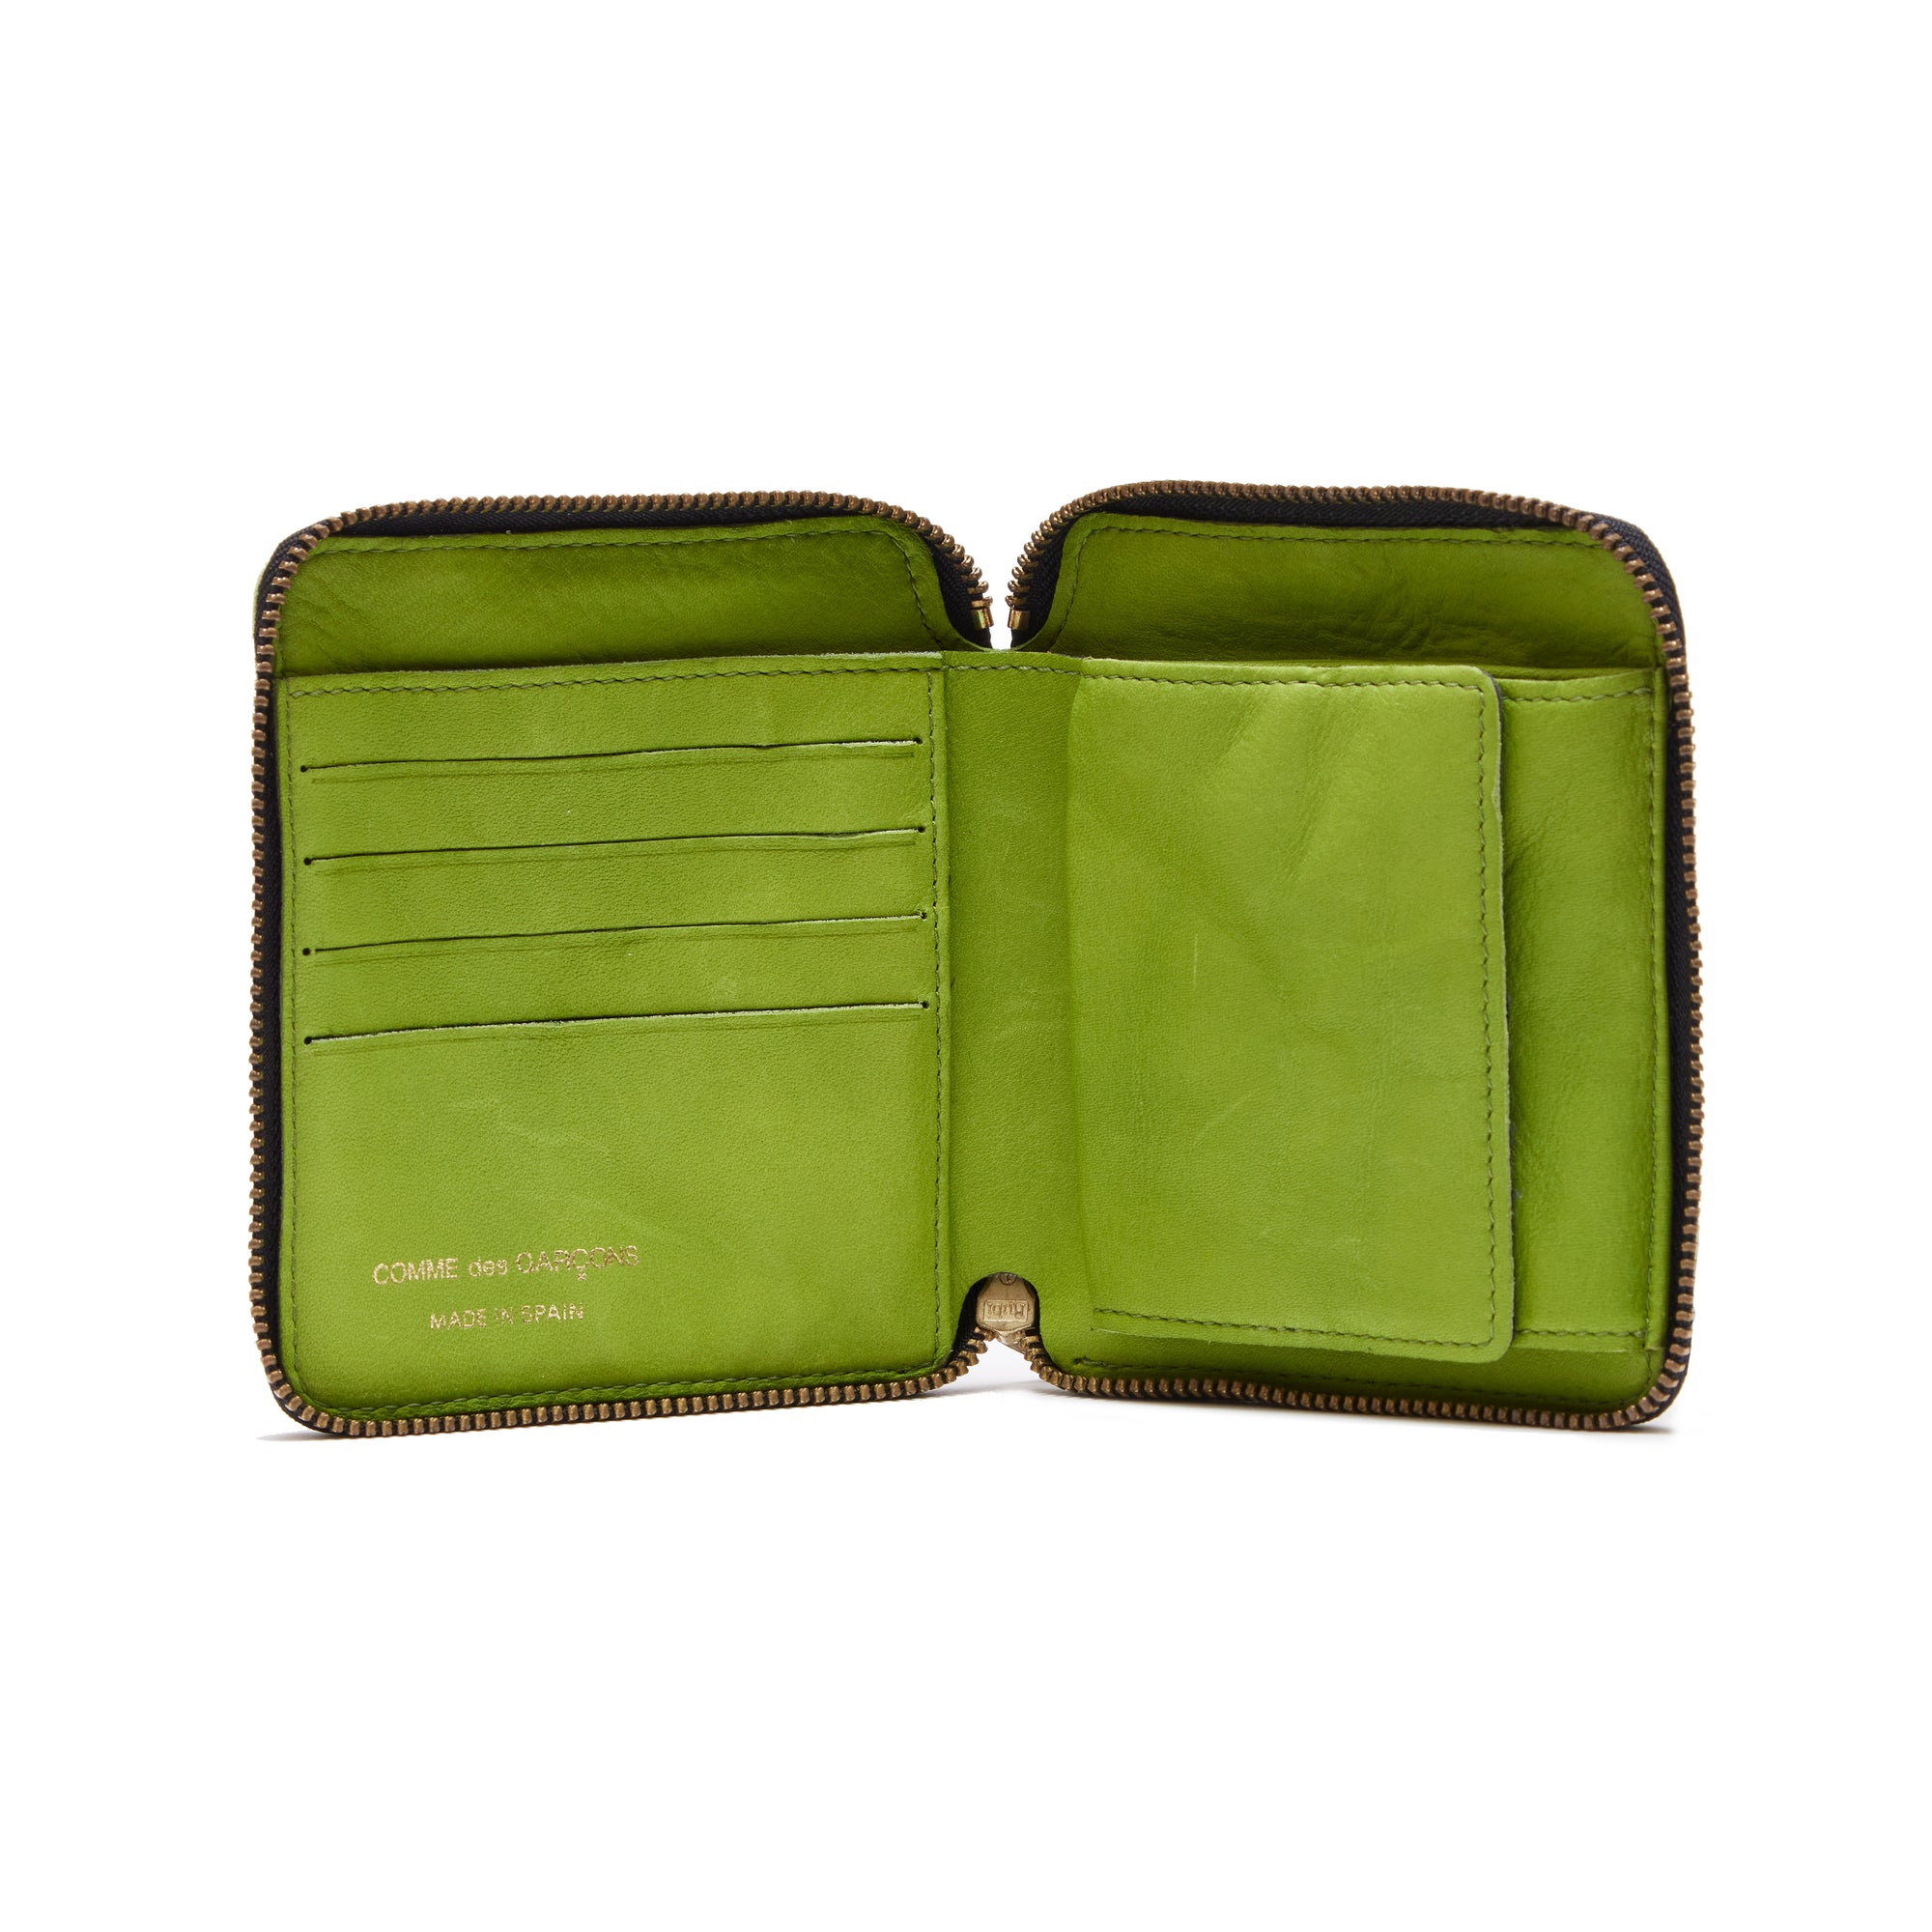 CDG WALLET - Washed Wallet - (8Z-Y021 Green) view 3